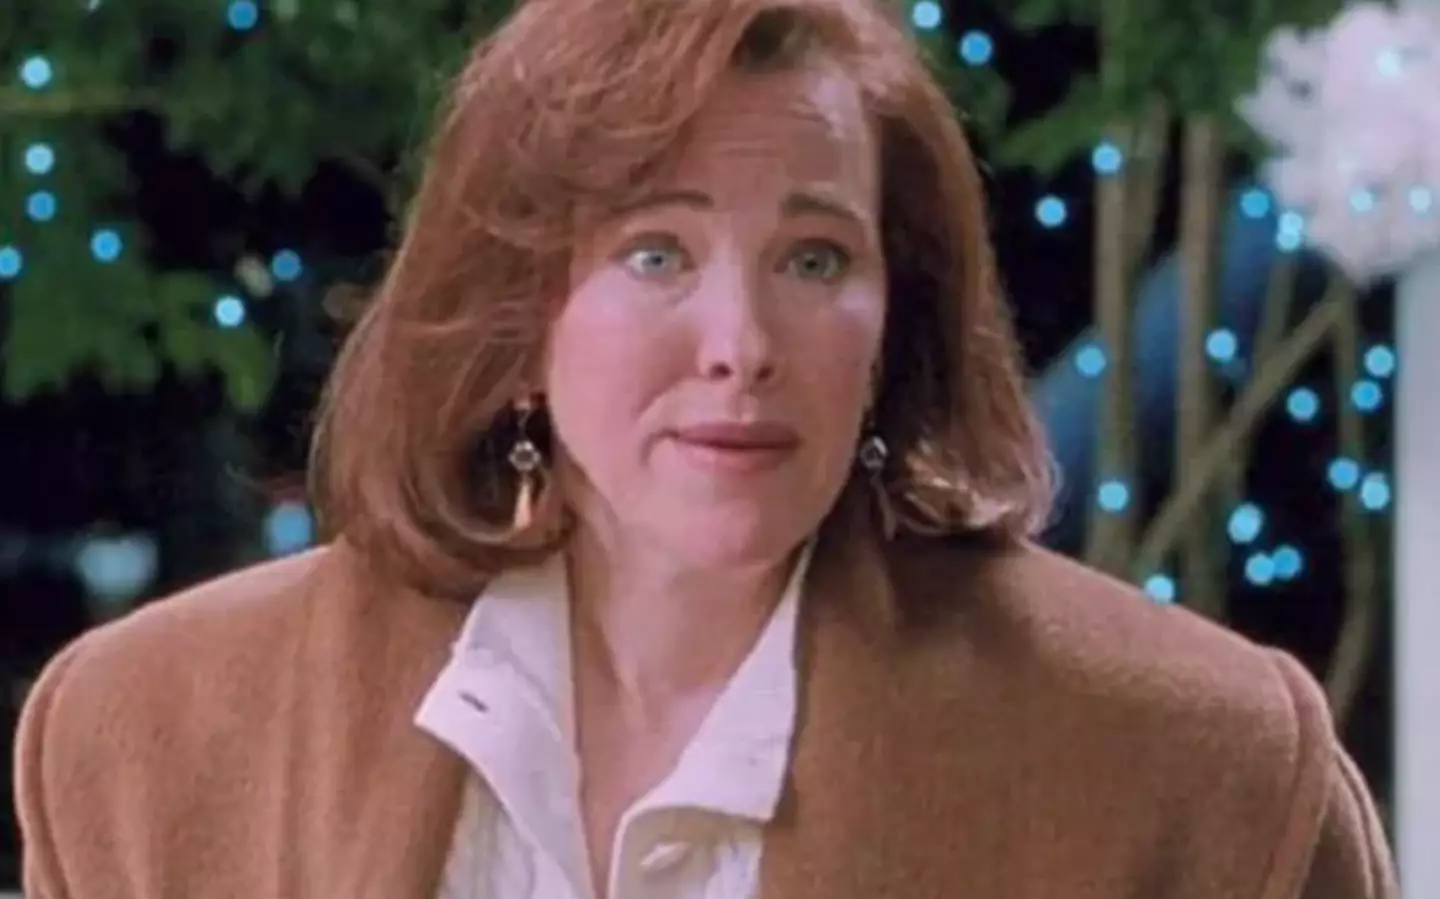 Catherine O'Hara played Kate McCallister in Home Alone.